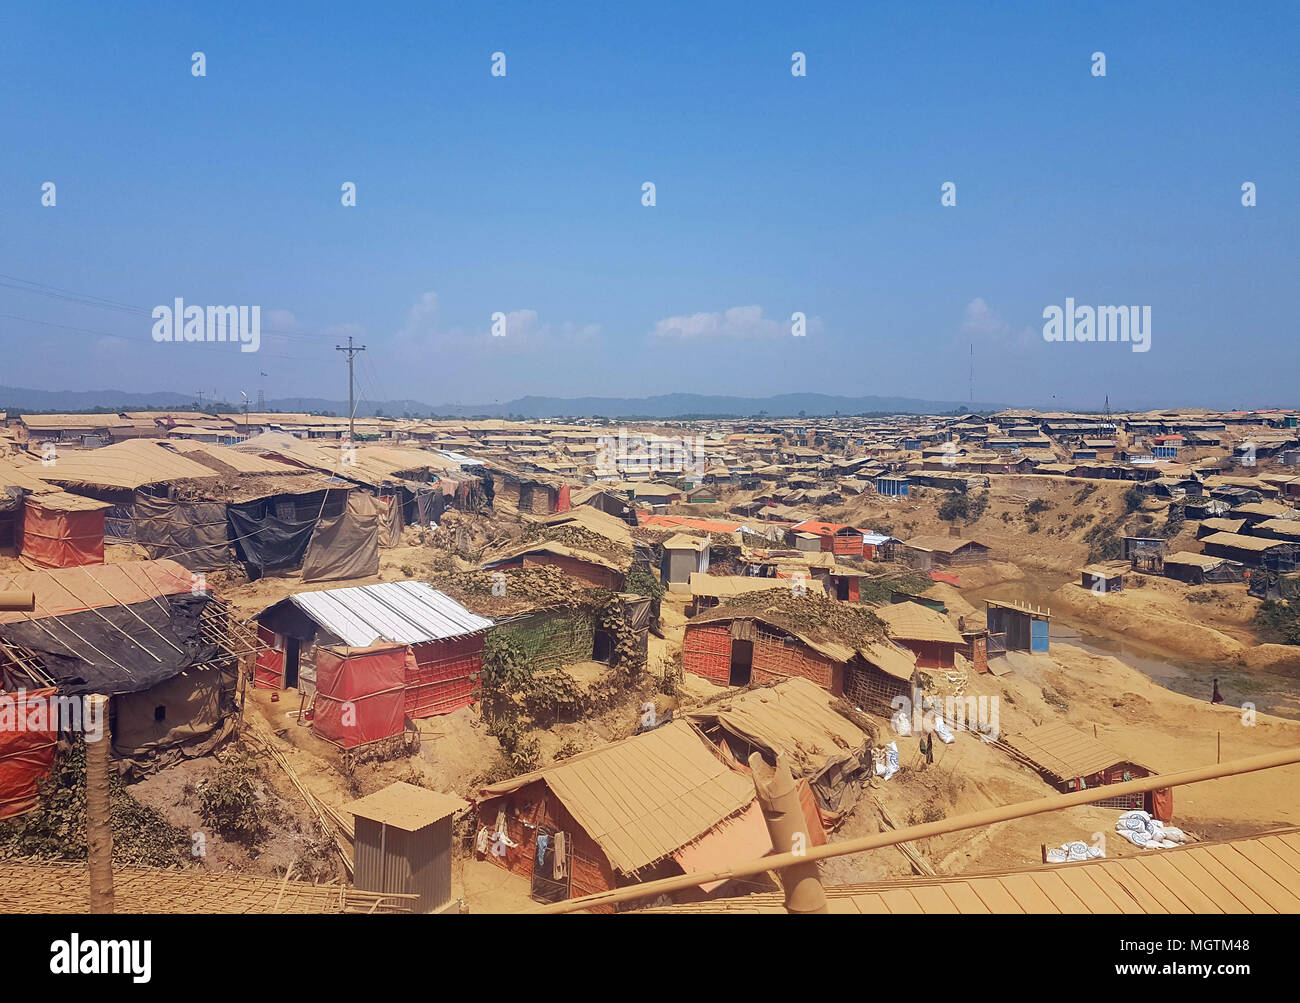 14 April 2018, Bangladesh, Cox·s Bazar: Tightly packed huts in a Rohingya refugee camp. Devastating damage through flooding and landslides are feared as the monsoon season approaches. Photo: Nick Kaiser/dpa - ATTENTION: only for use until the end of the public police search Stock Photo